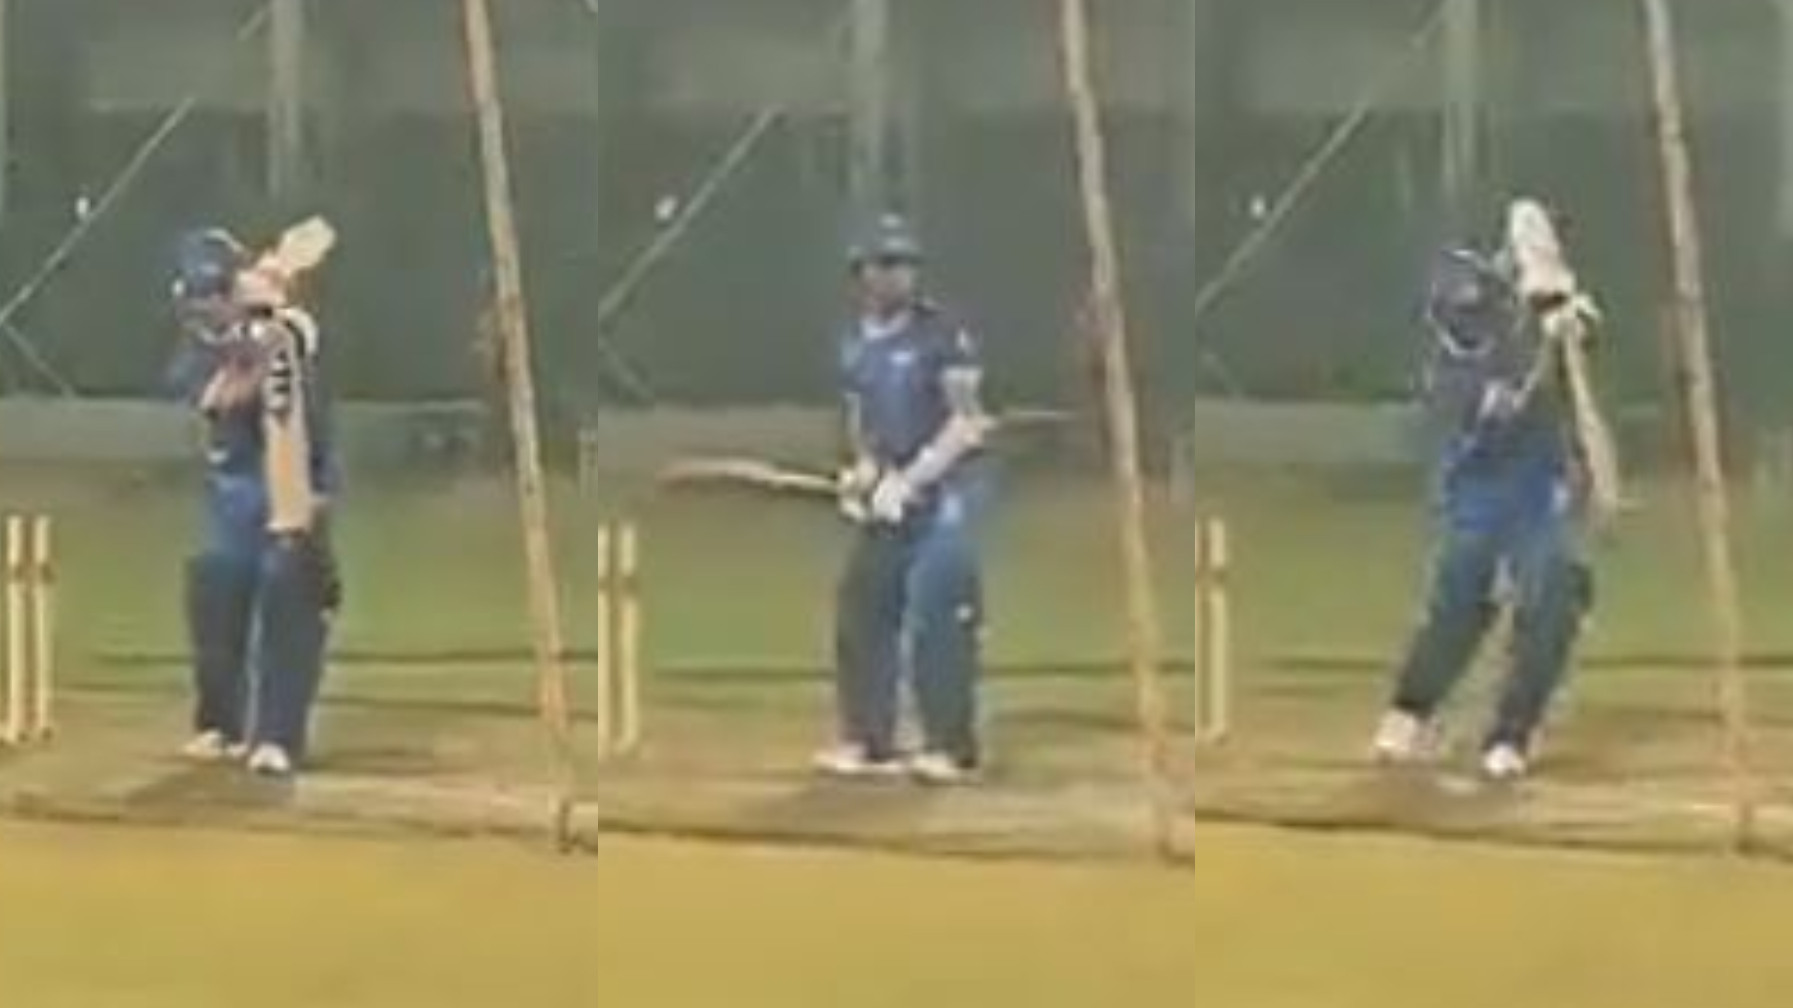 RSWS 2022: WATCH- Sachin Tendulkar reels off picturesque drives in prep for Road Safety World Series